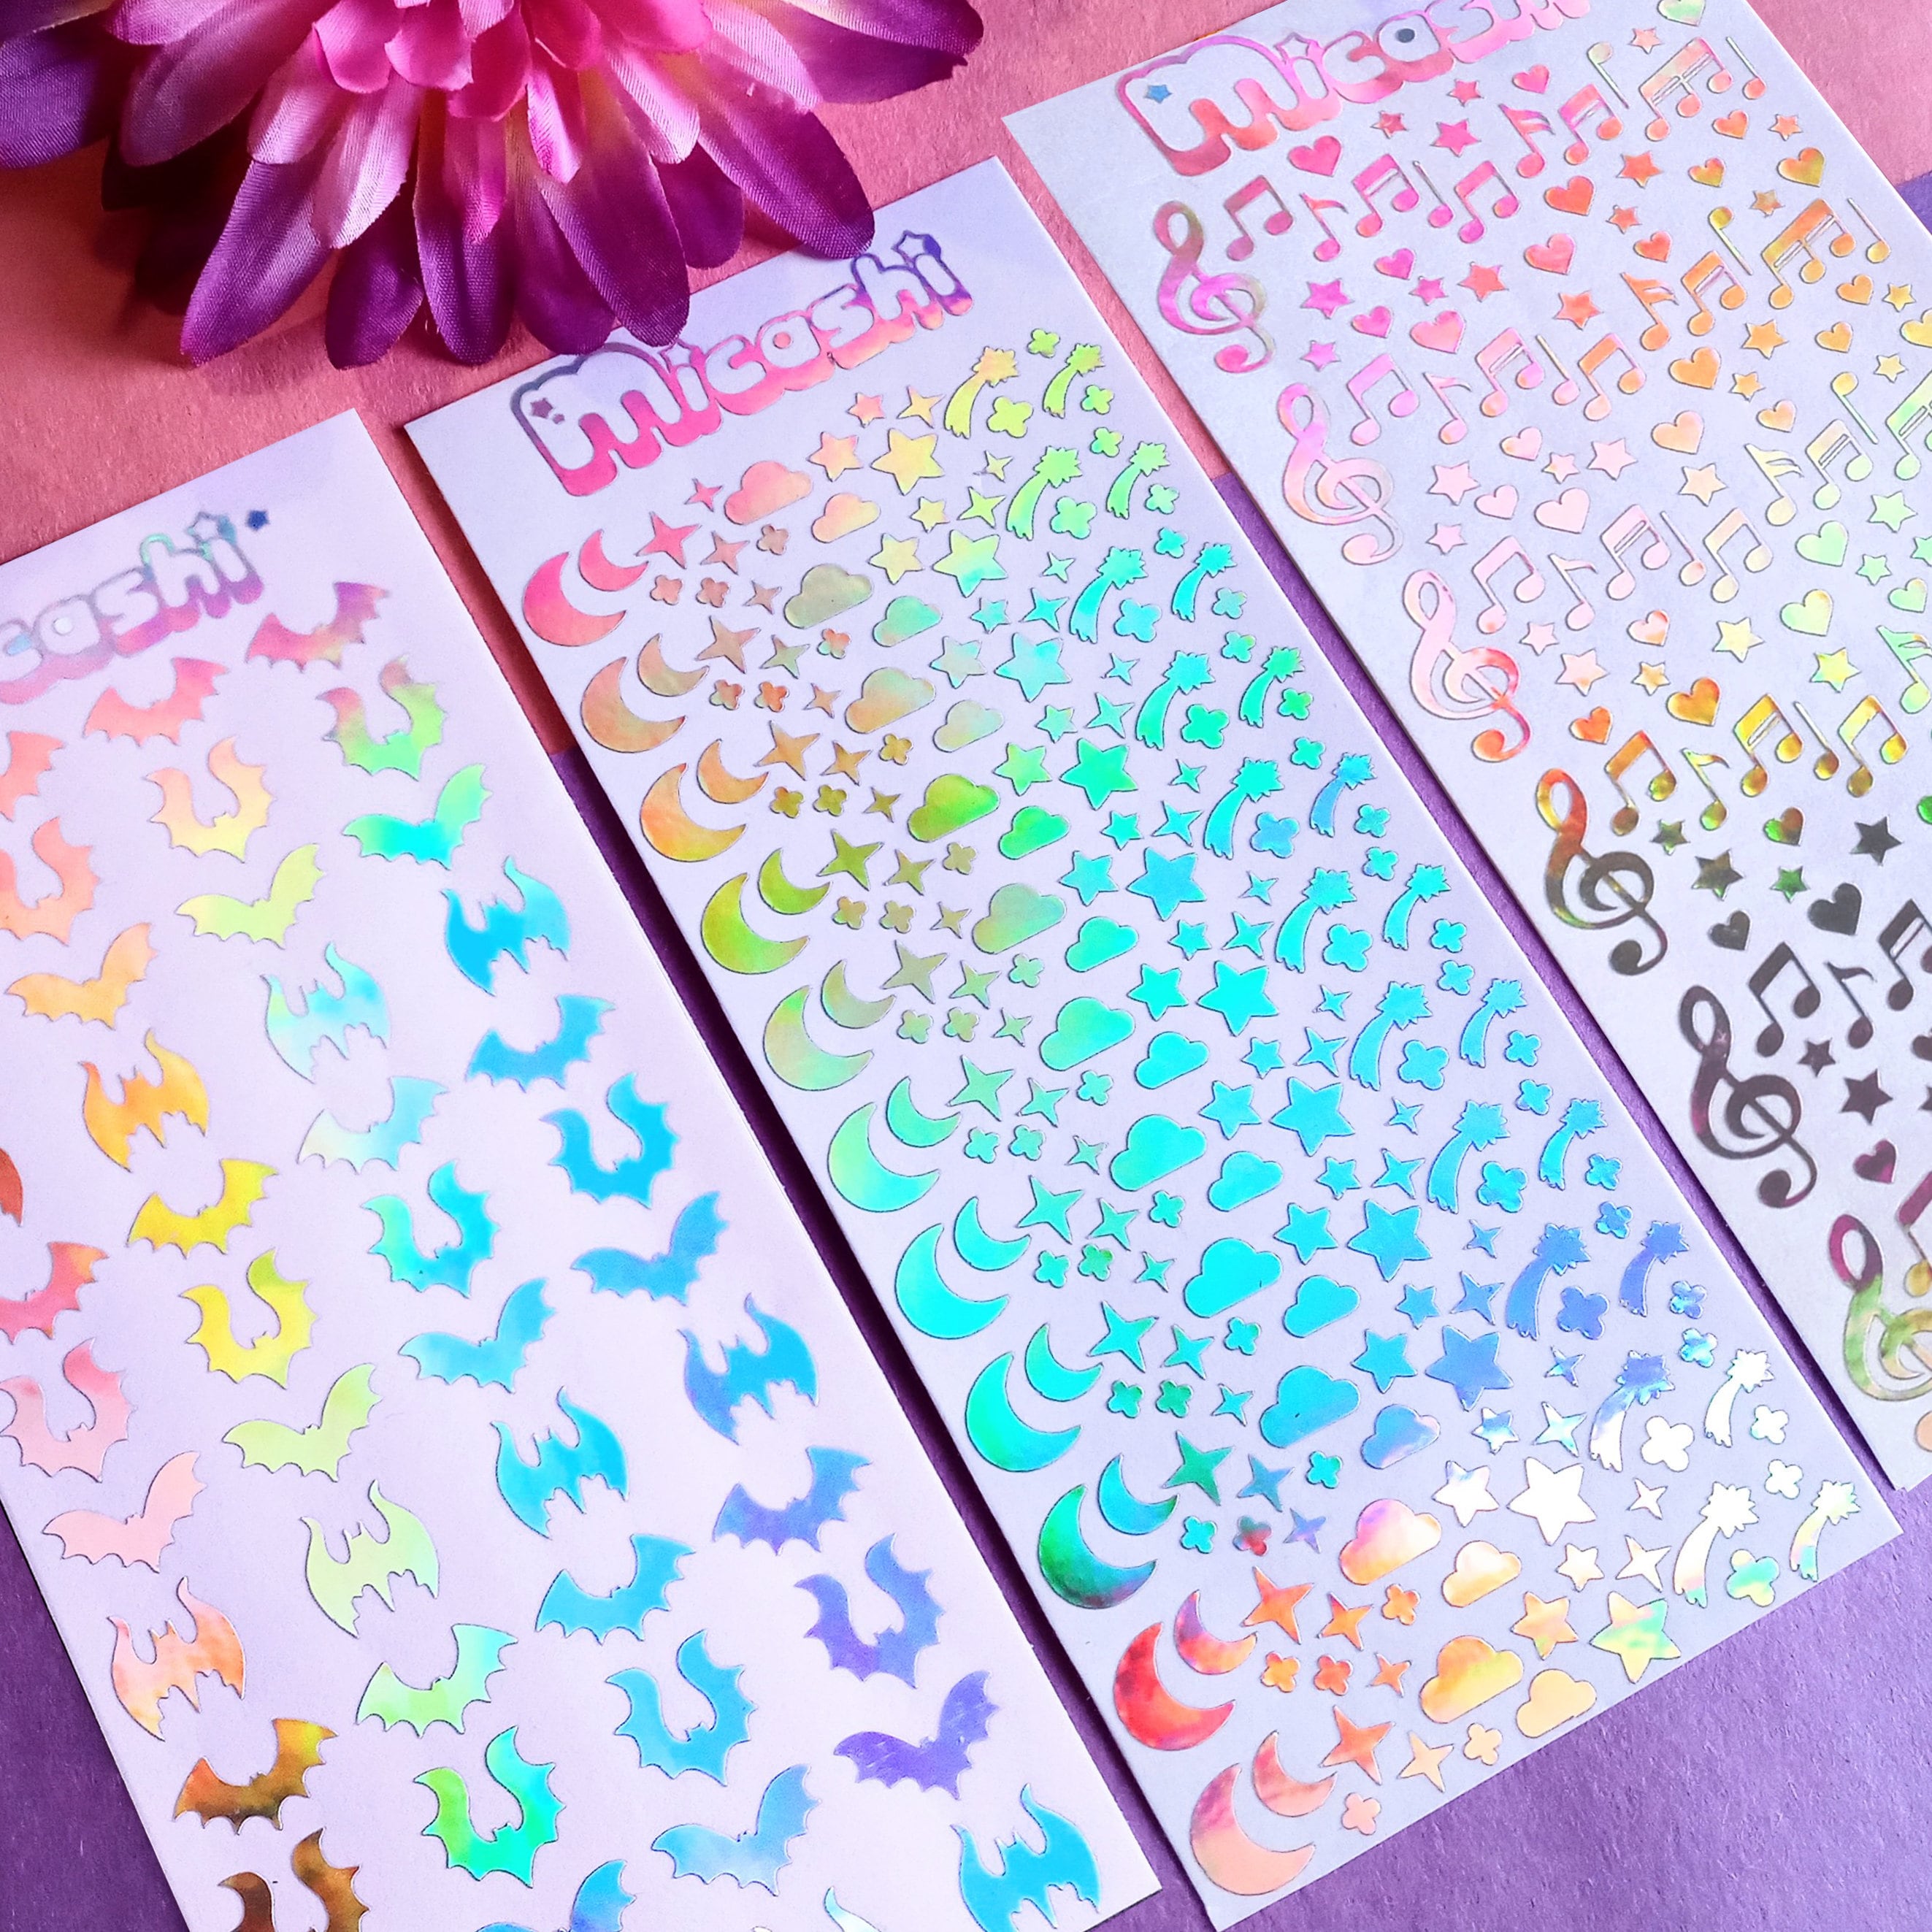 Heart Holographic Deco Sticker Sheet Polco Toploader Stickers K